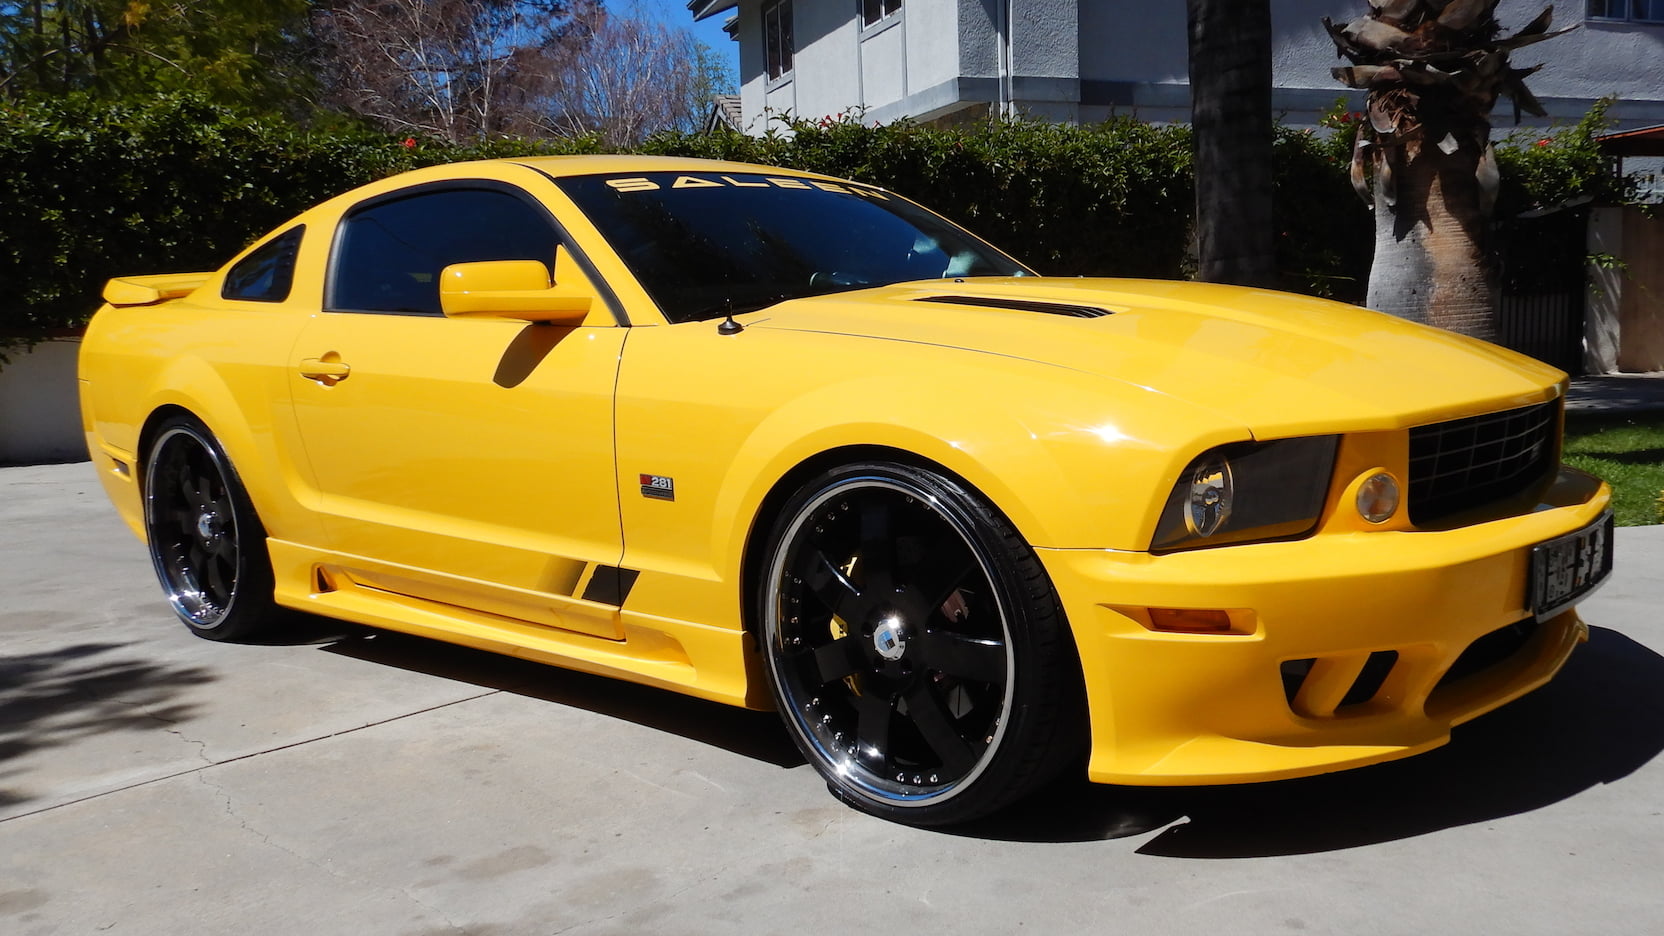 Mustang Of The Day: 2006 Ford Mustang Saleen S281